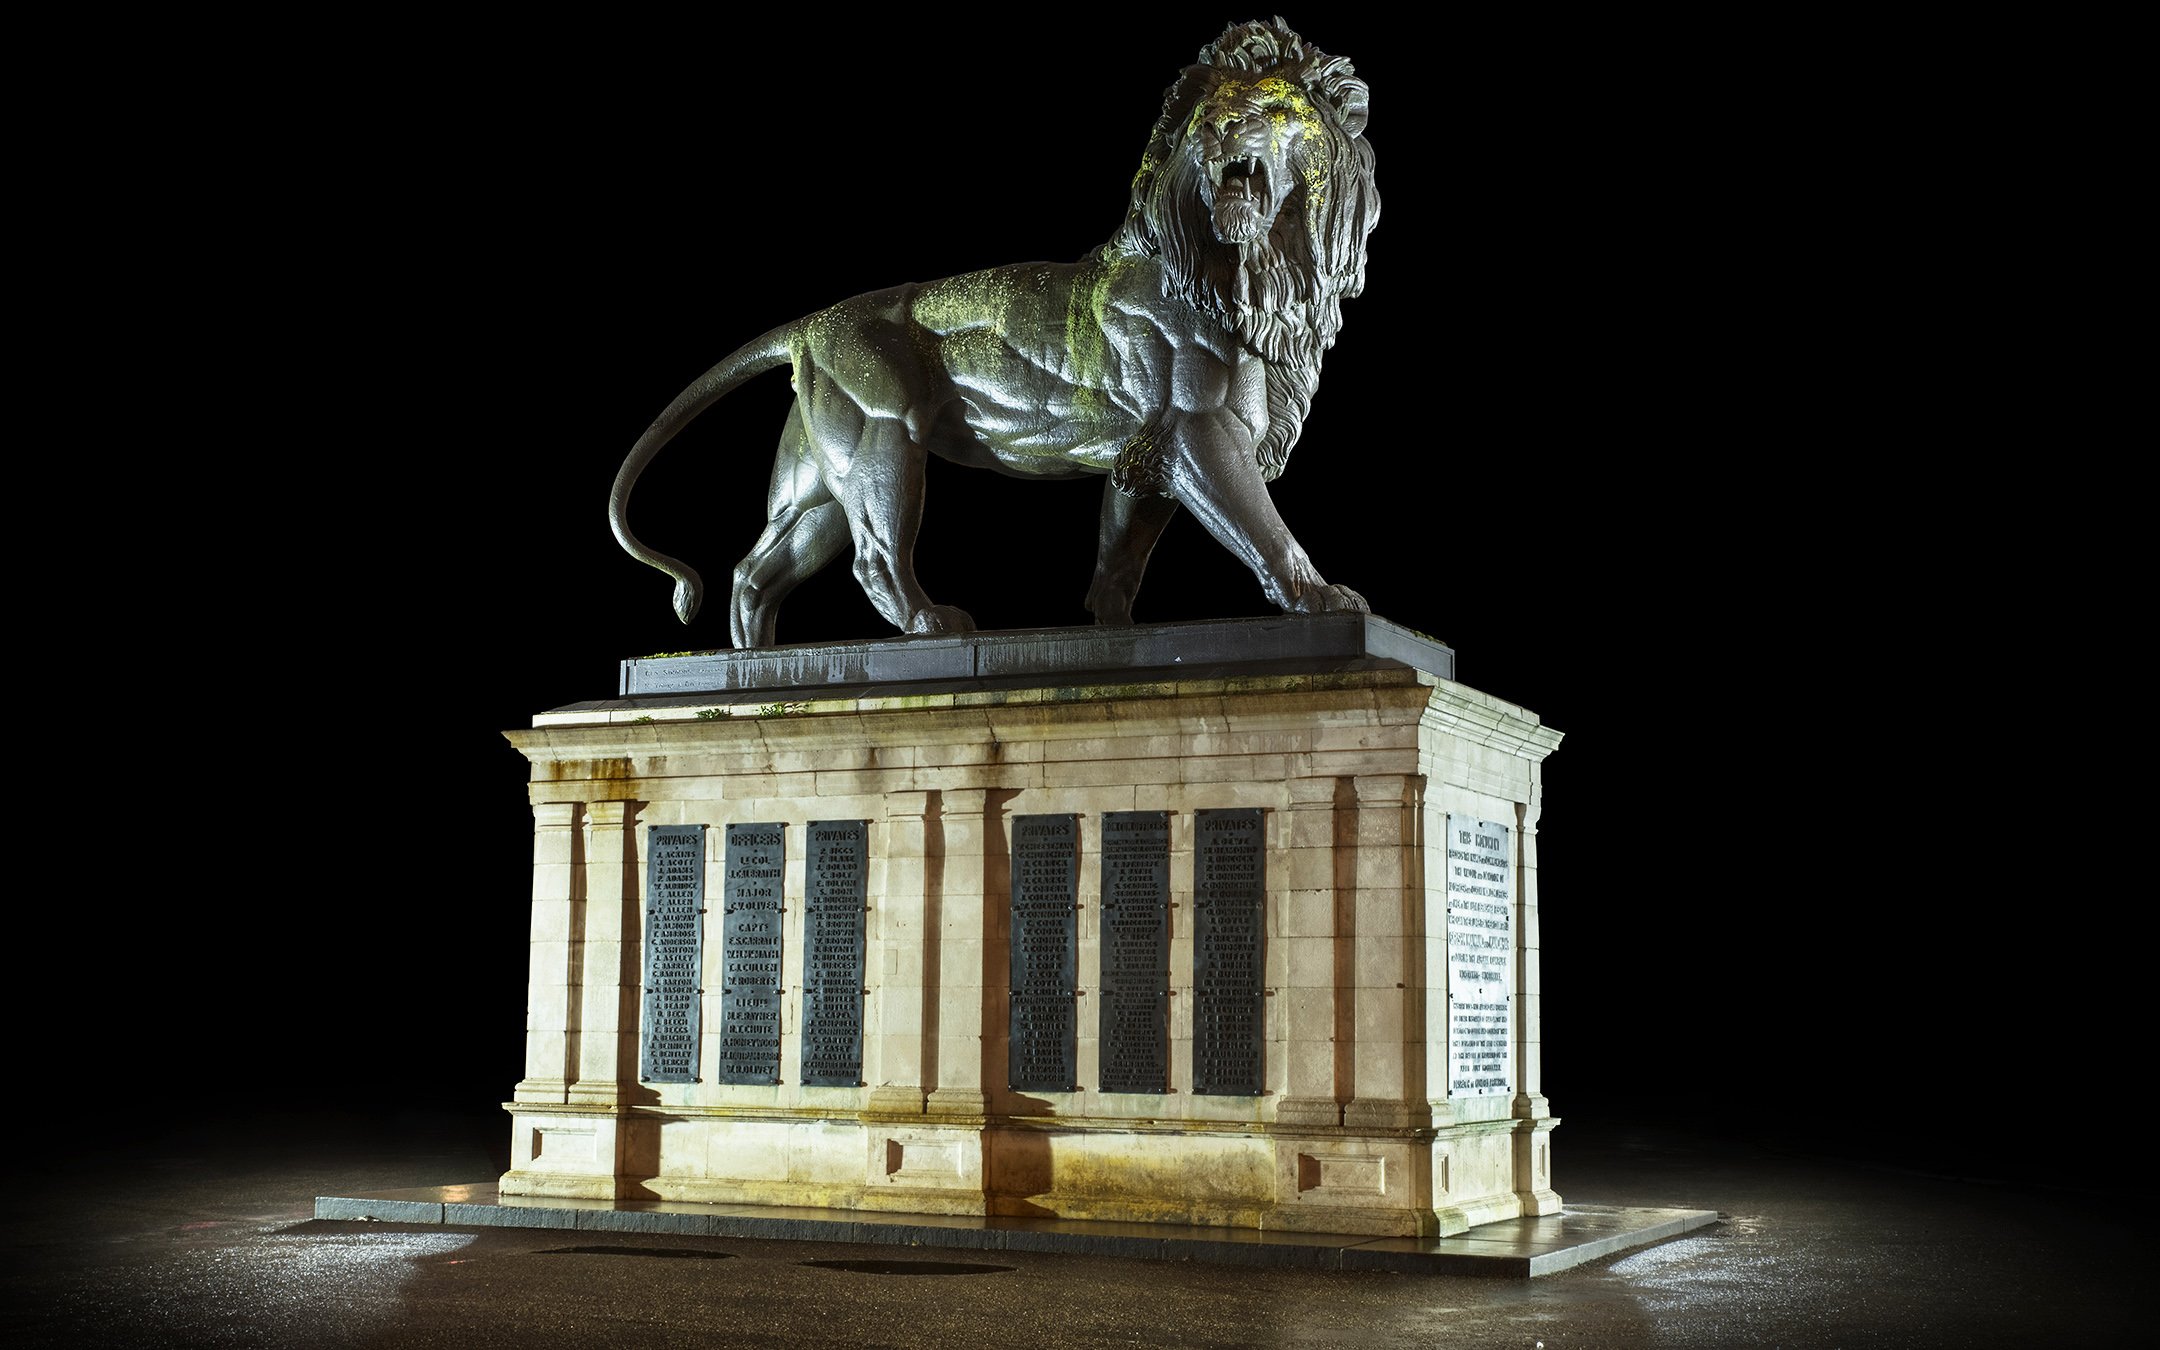 The Maiwand Lion memorial in the Forbury Gardens